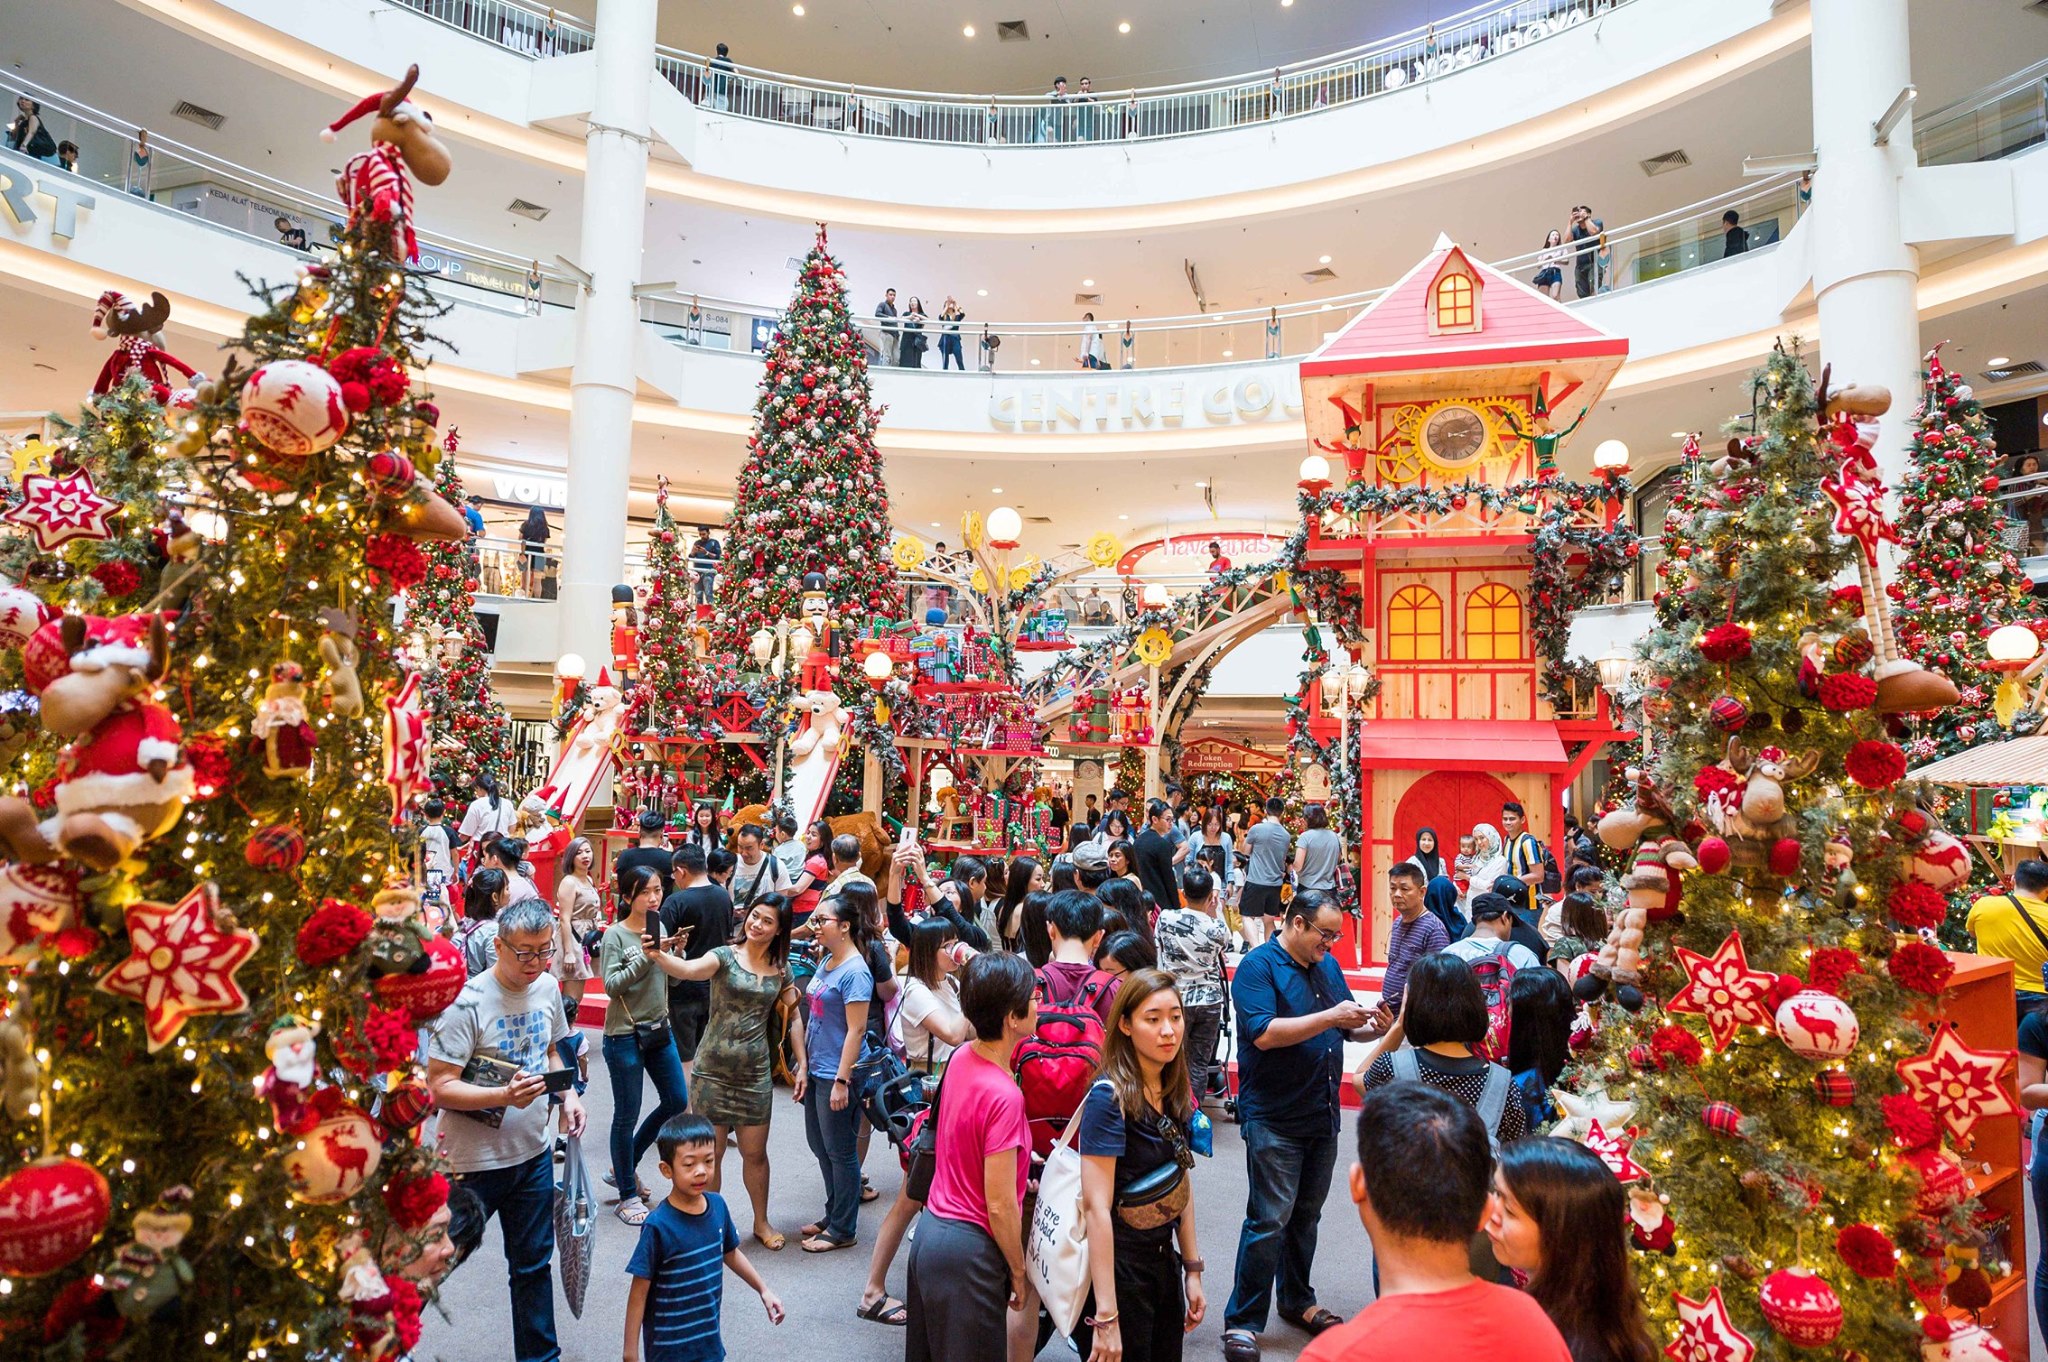 12 Shopping Malls Christmas Decorations In The Klang Valley